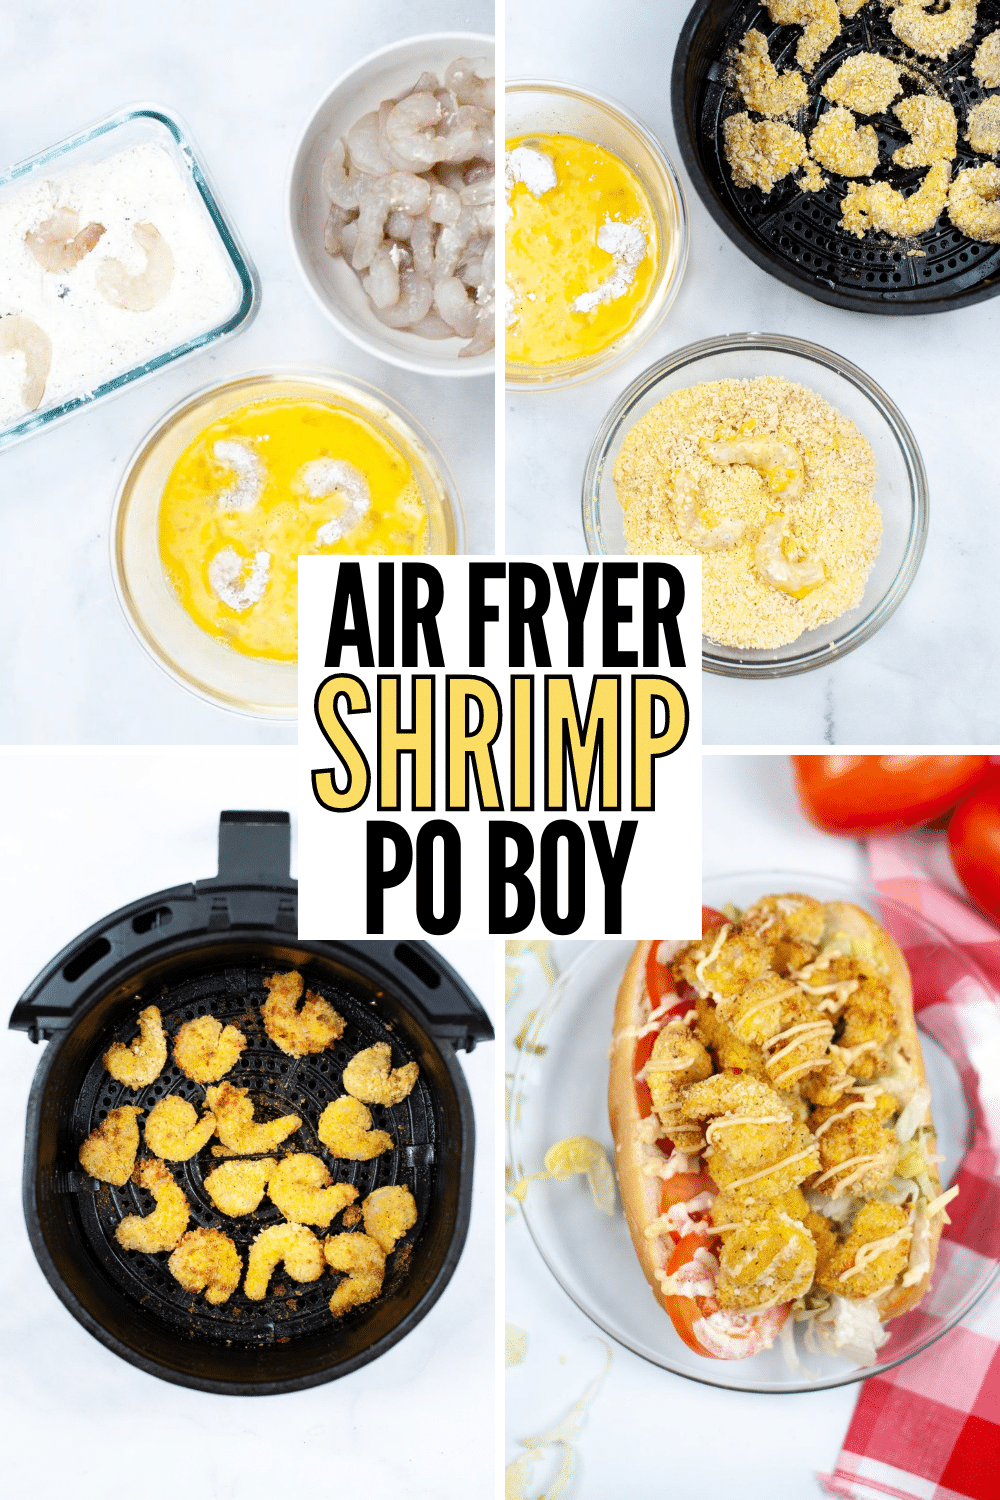 Air Fryer Shrimp Po Boy sandwiches are easy to make and a great healthier swap for this classic New Orleans dish. It's flavorful & less fat. #airfryer #shrimppoboy #sandwich #poboy #shrimp via @wondermomwannab